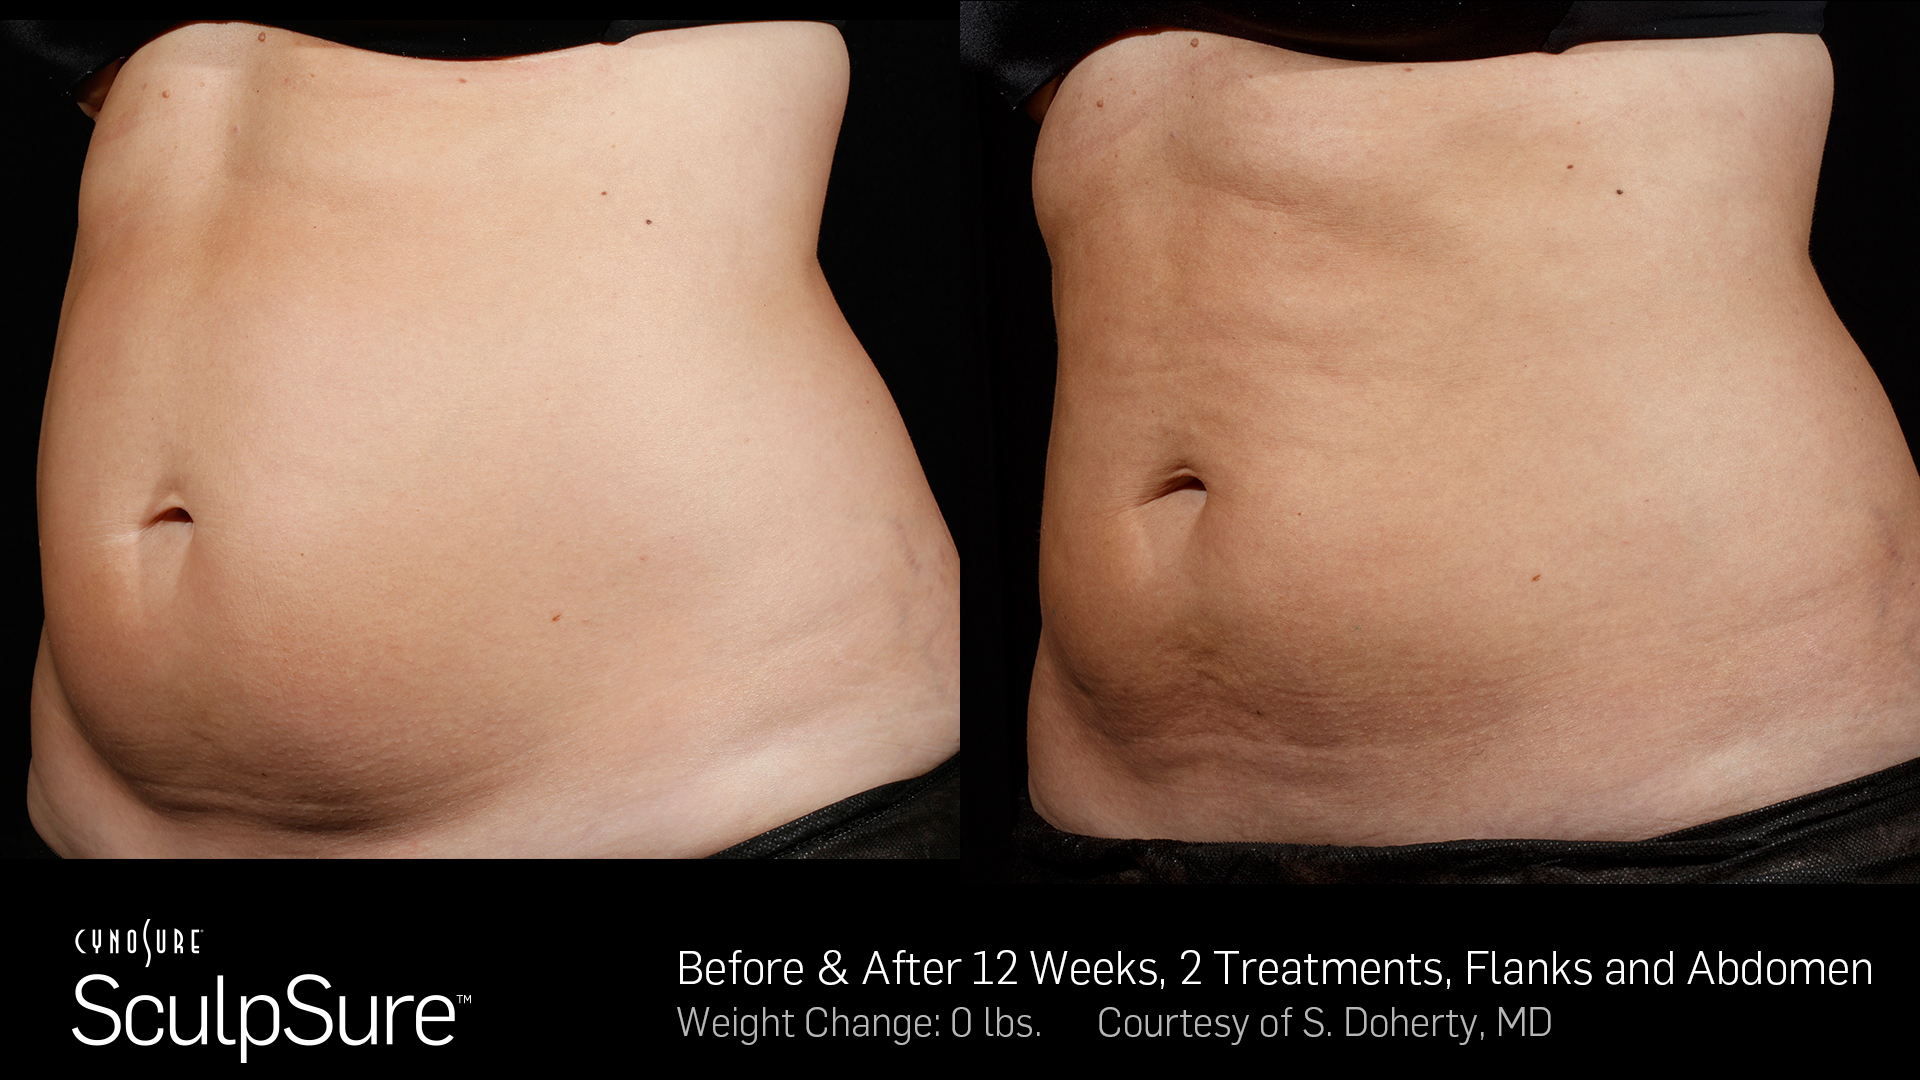 Sculpsure treatment in Overland Park, Before and After Photos